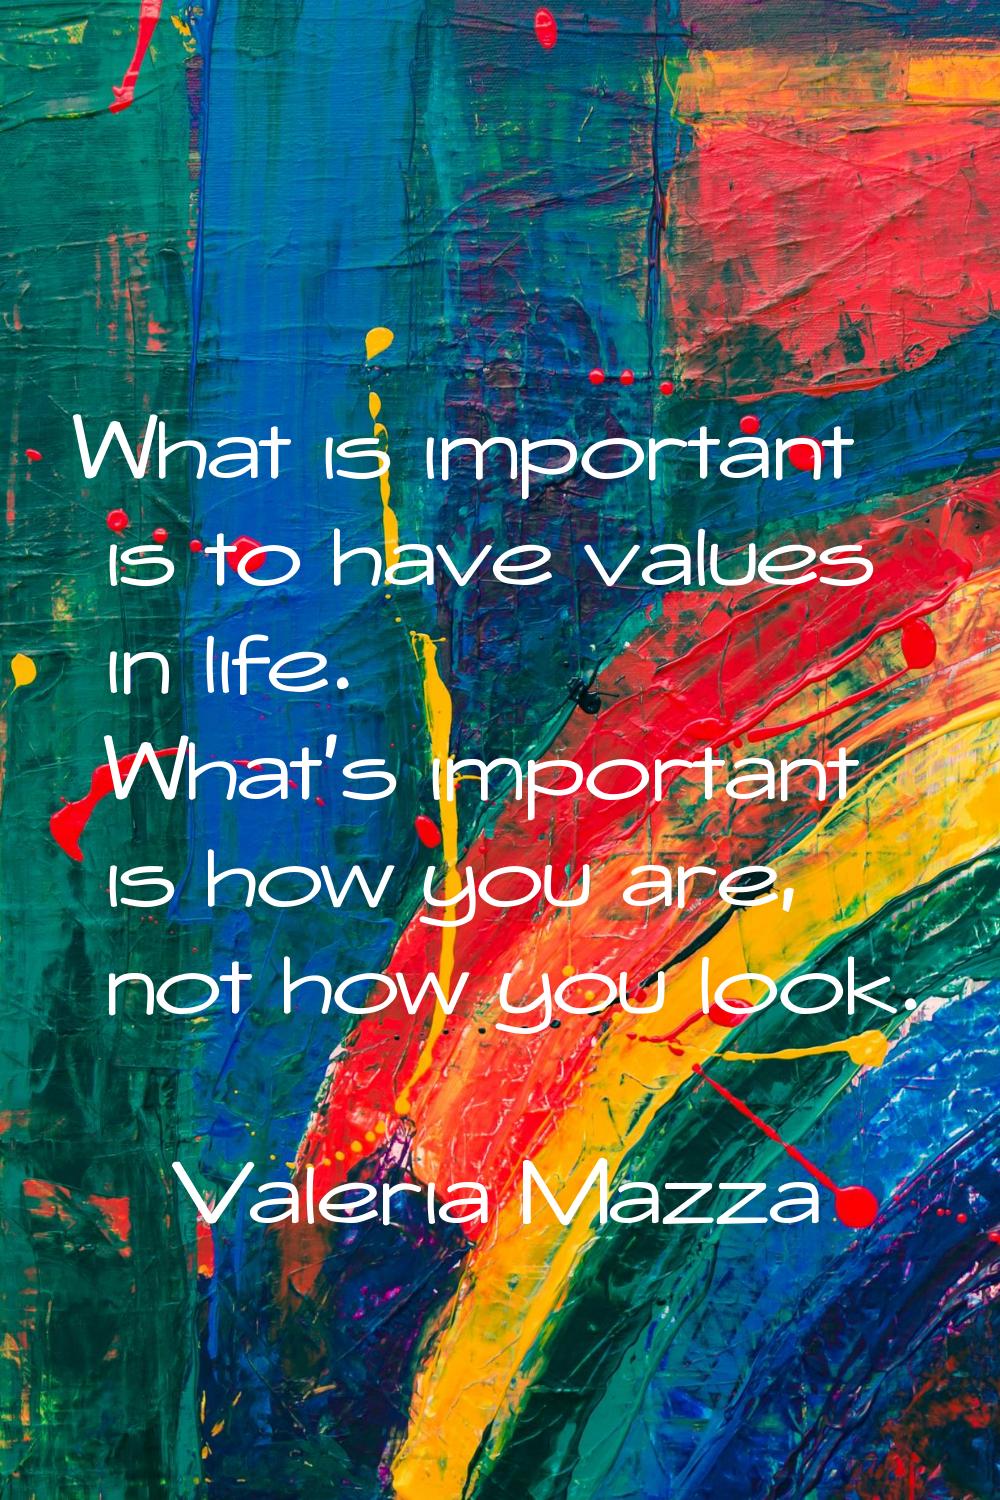 What is important is to have values in life. What's important is how you are, not how you look.